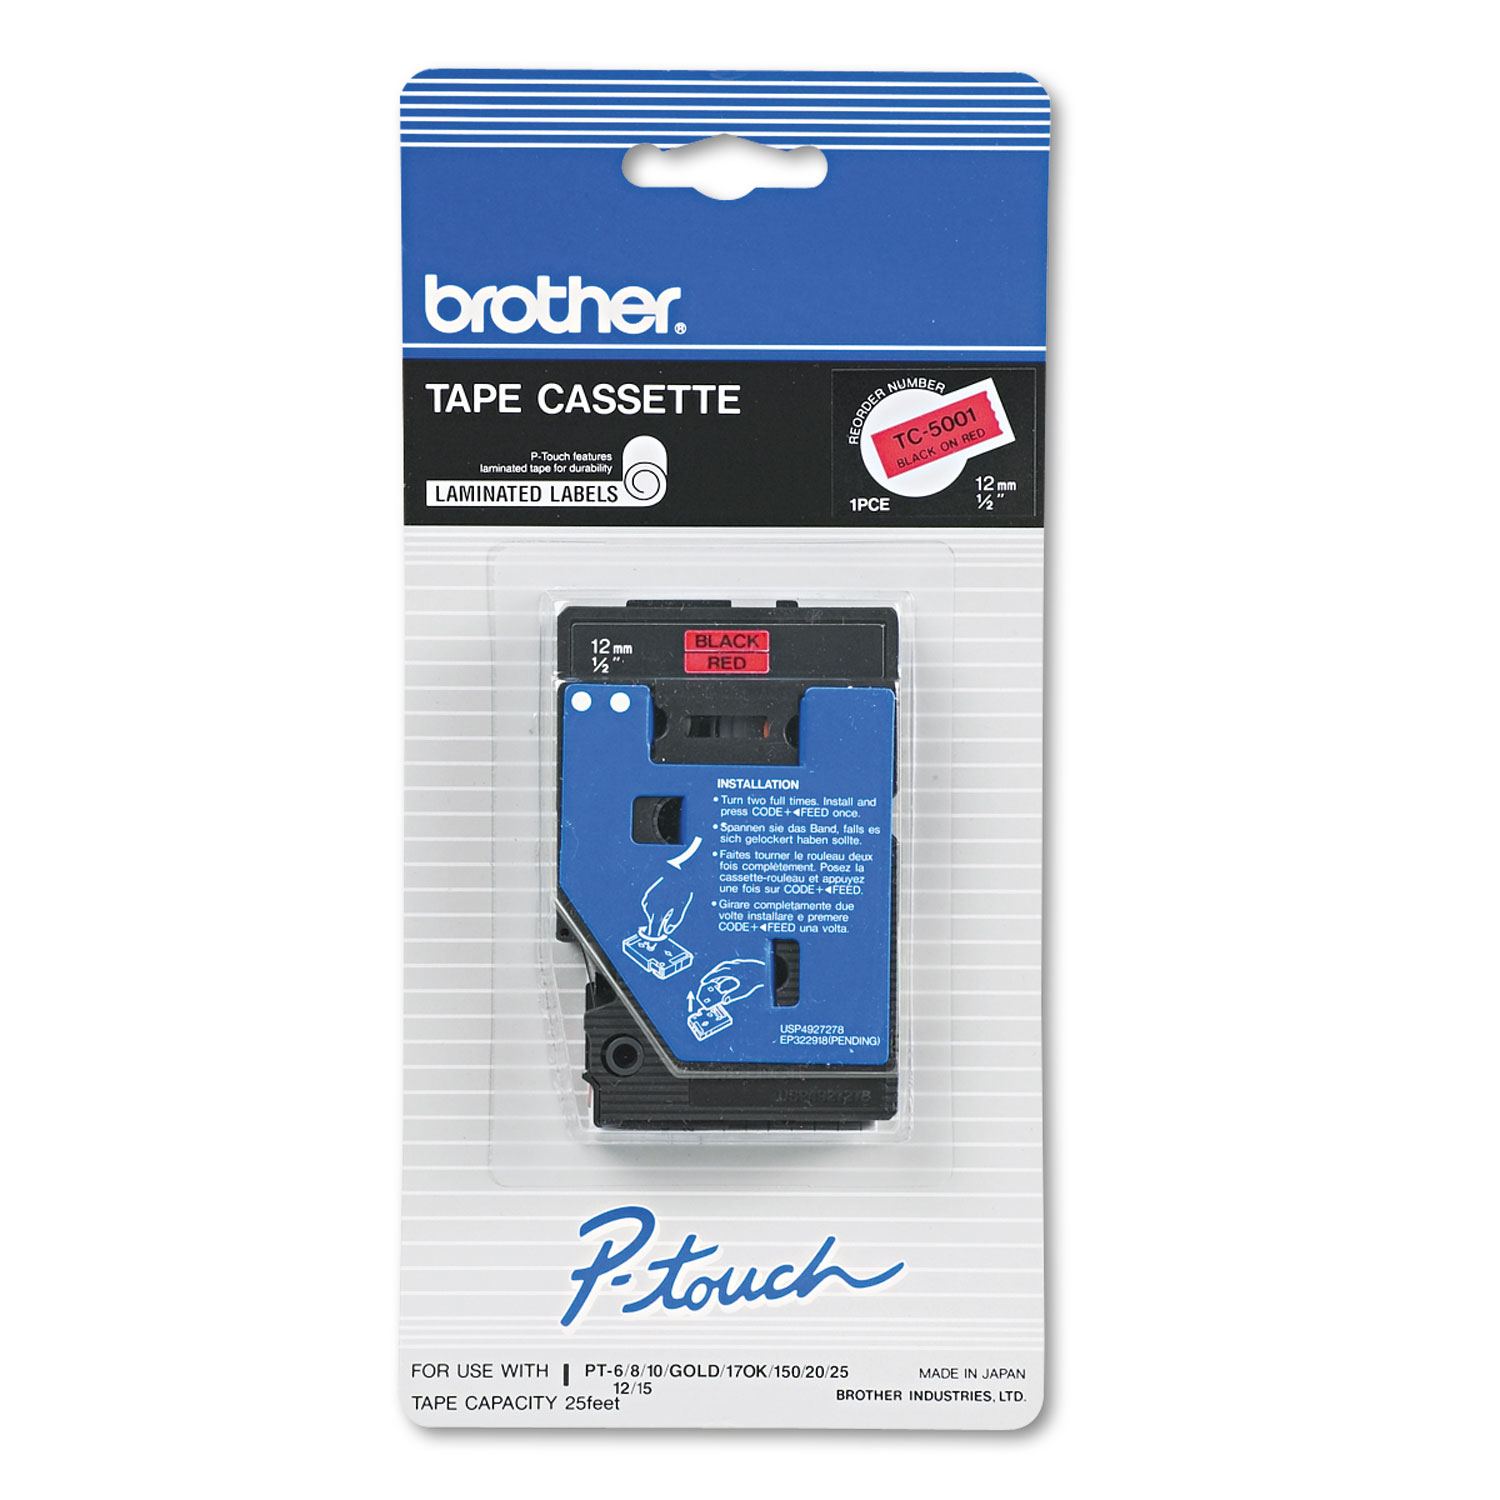  Brother P-Touch TC5001 TC Tape Cartridge for P-Touch Labelers, 0.5 x 25.2 ft, Black on Red (BRTTC5001) 